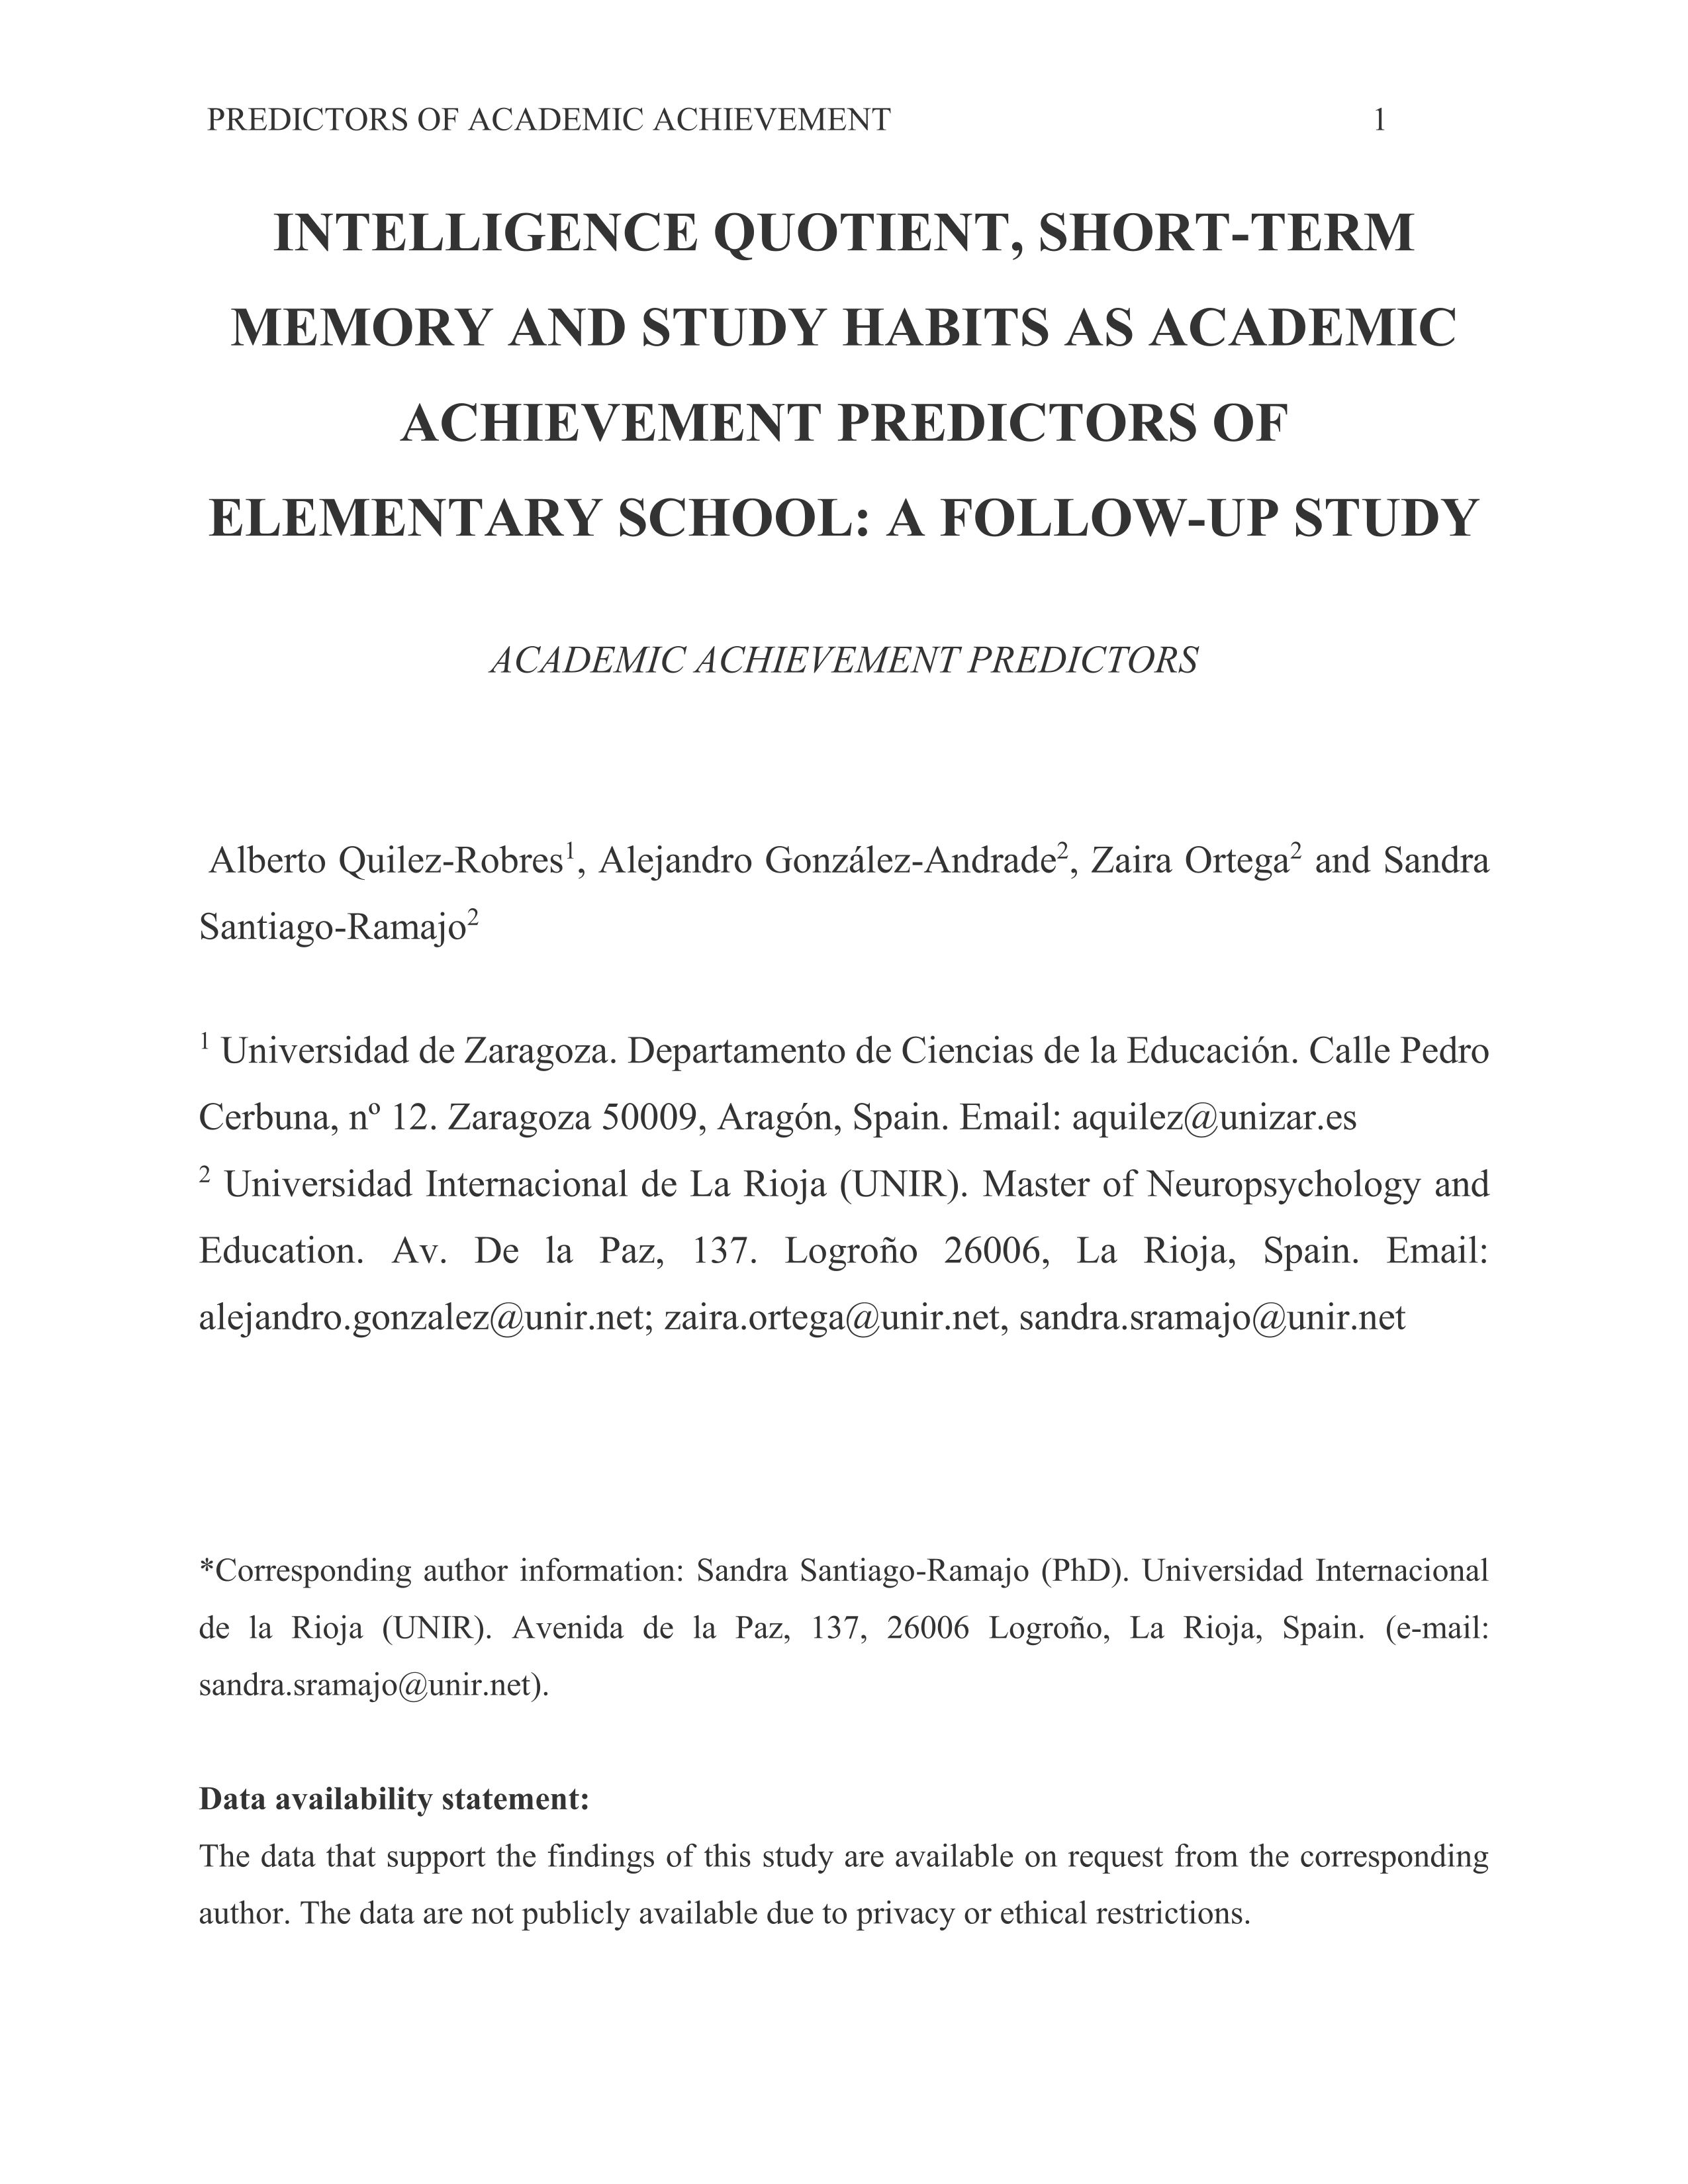 Intelligence quotient, short-term memory and study habits as academic achievement predictors of elementary school: a follow-up study